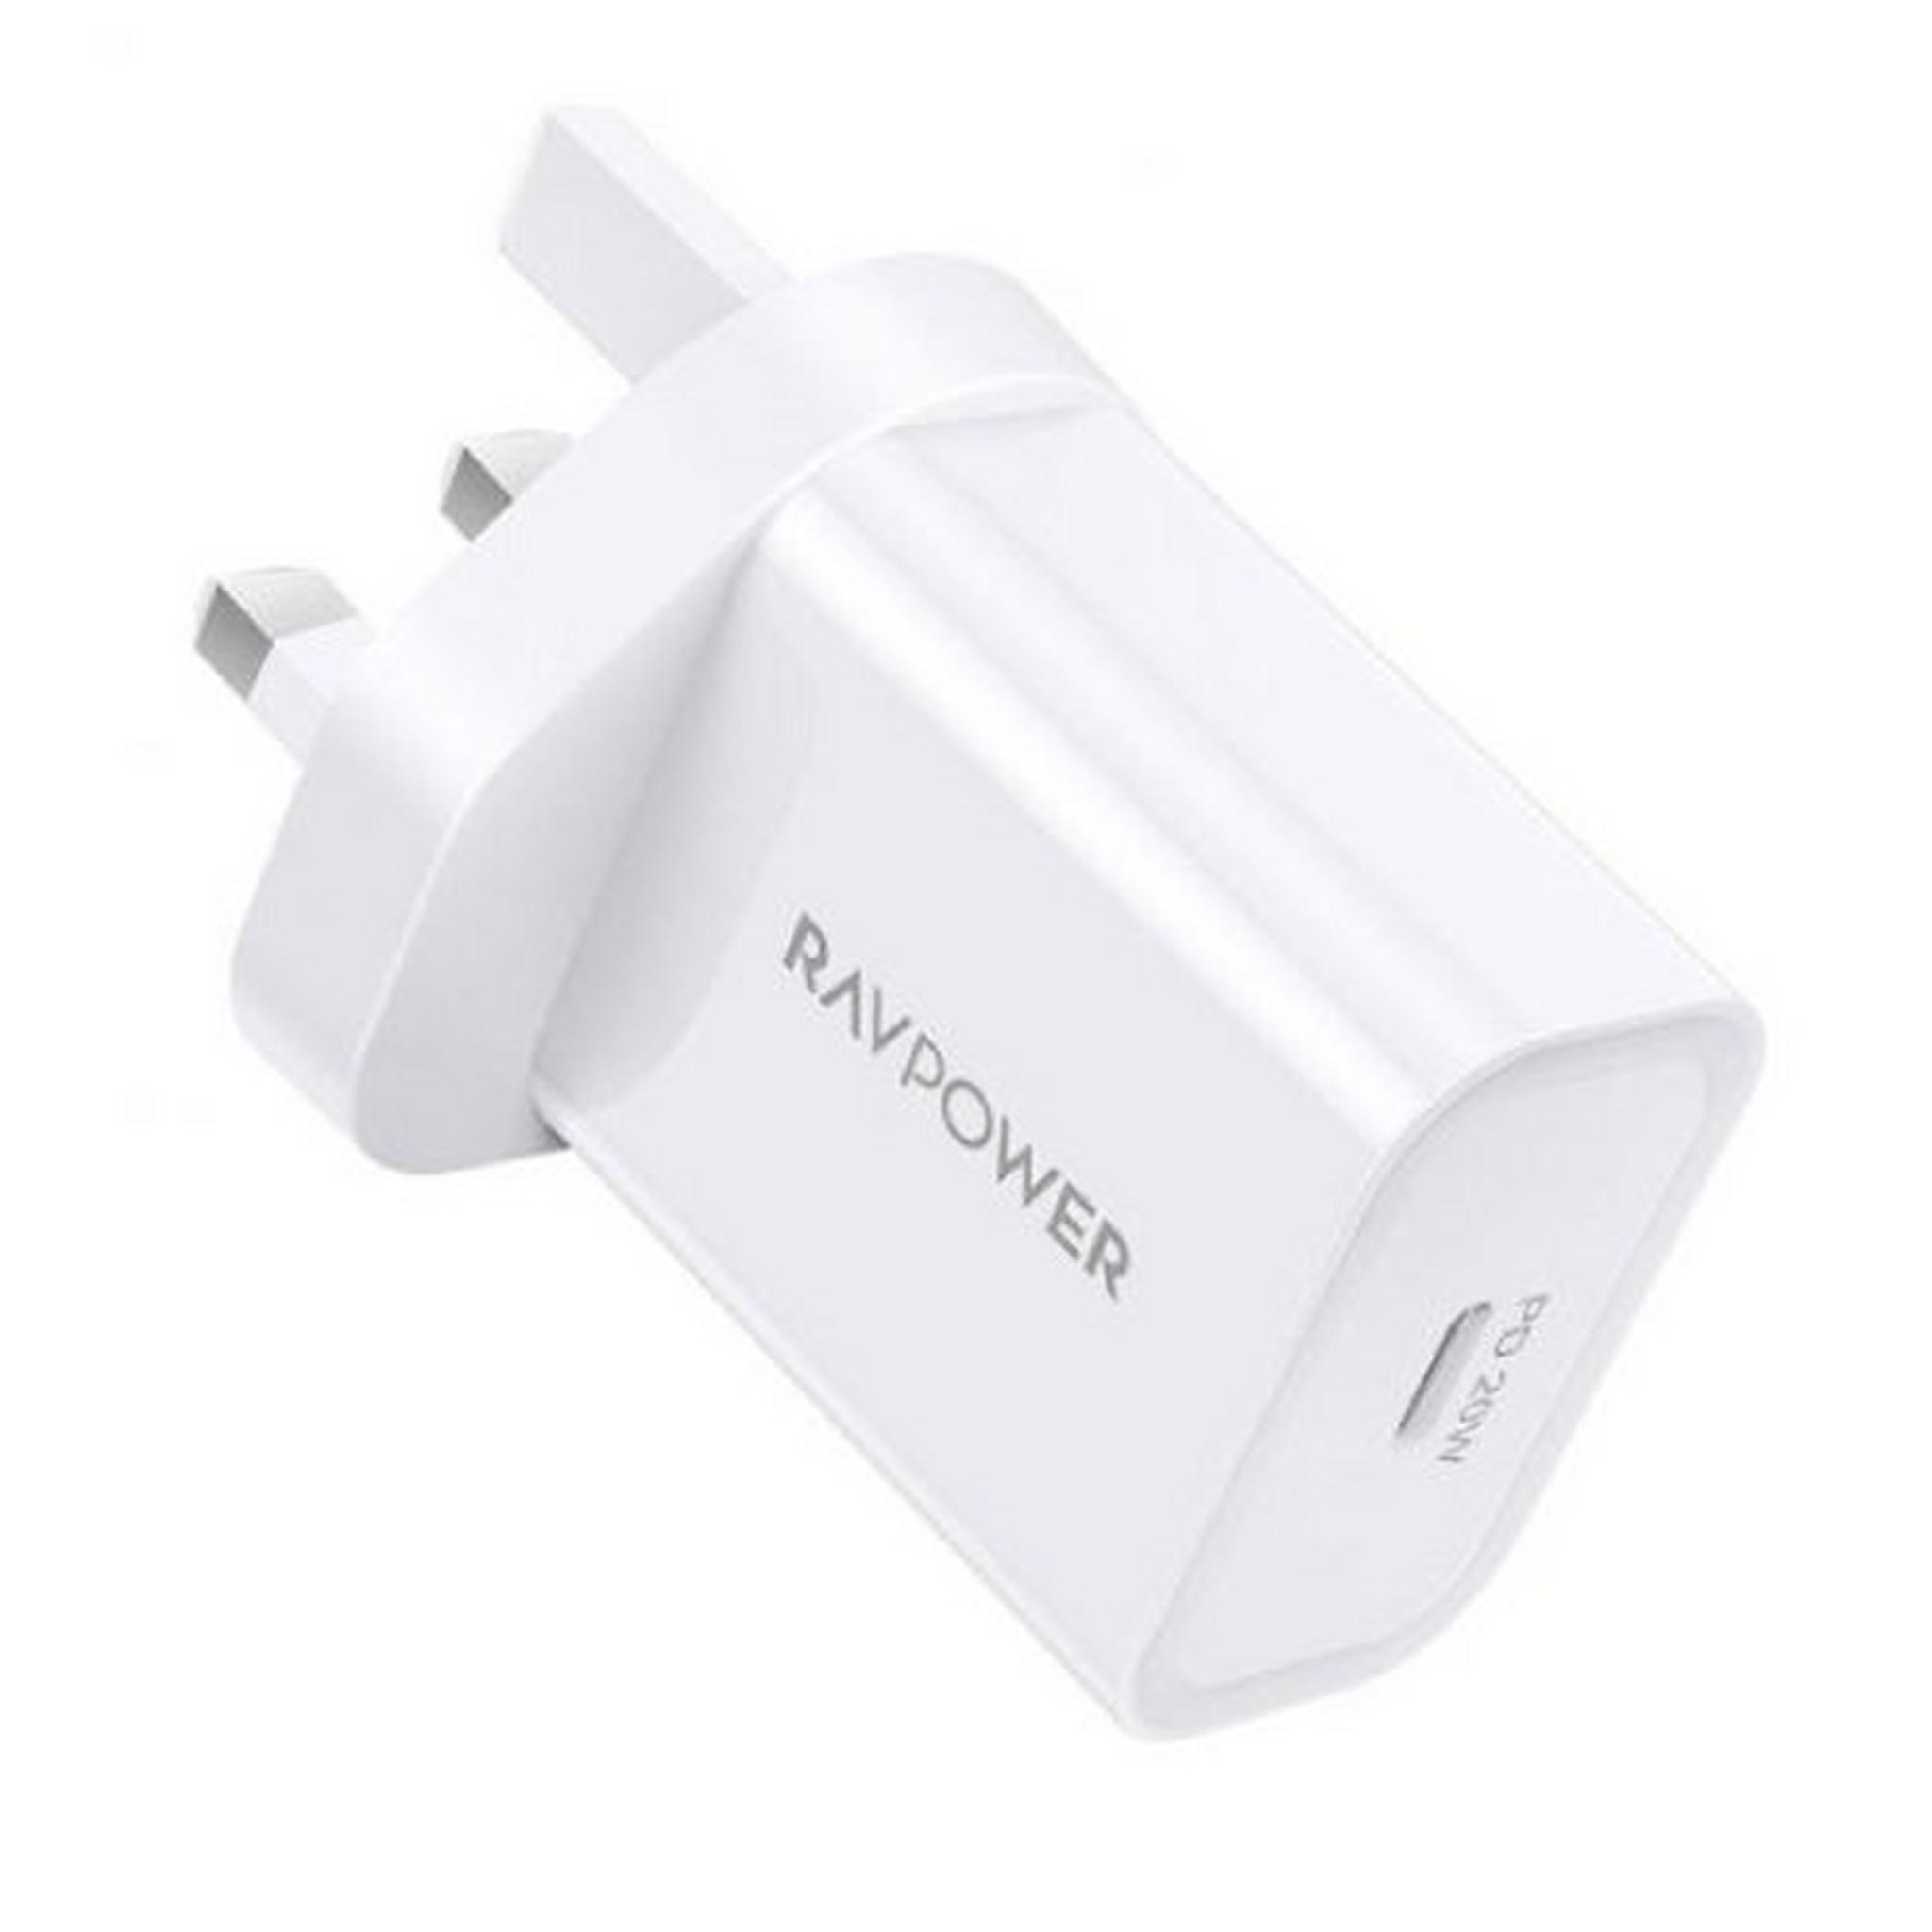 RAVPower PD Pioneer 20W Wall Charger (RP-PC147) - White